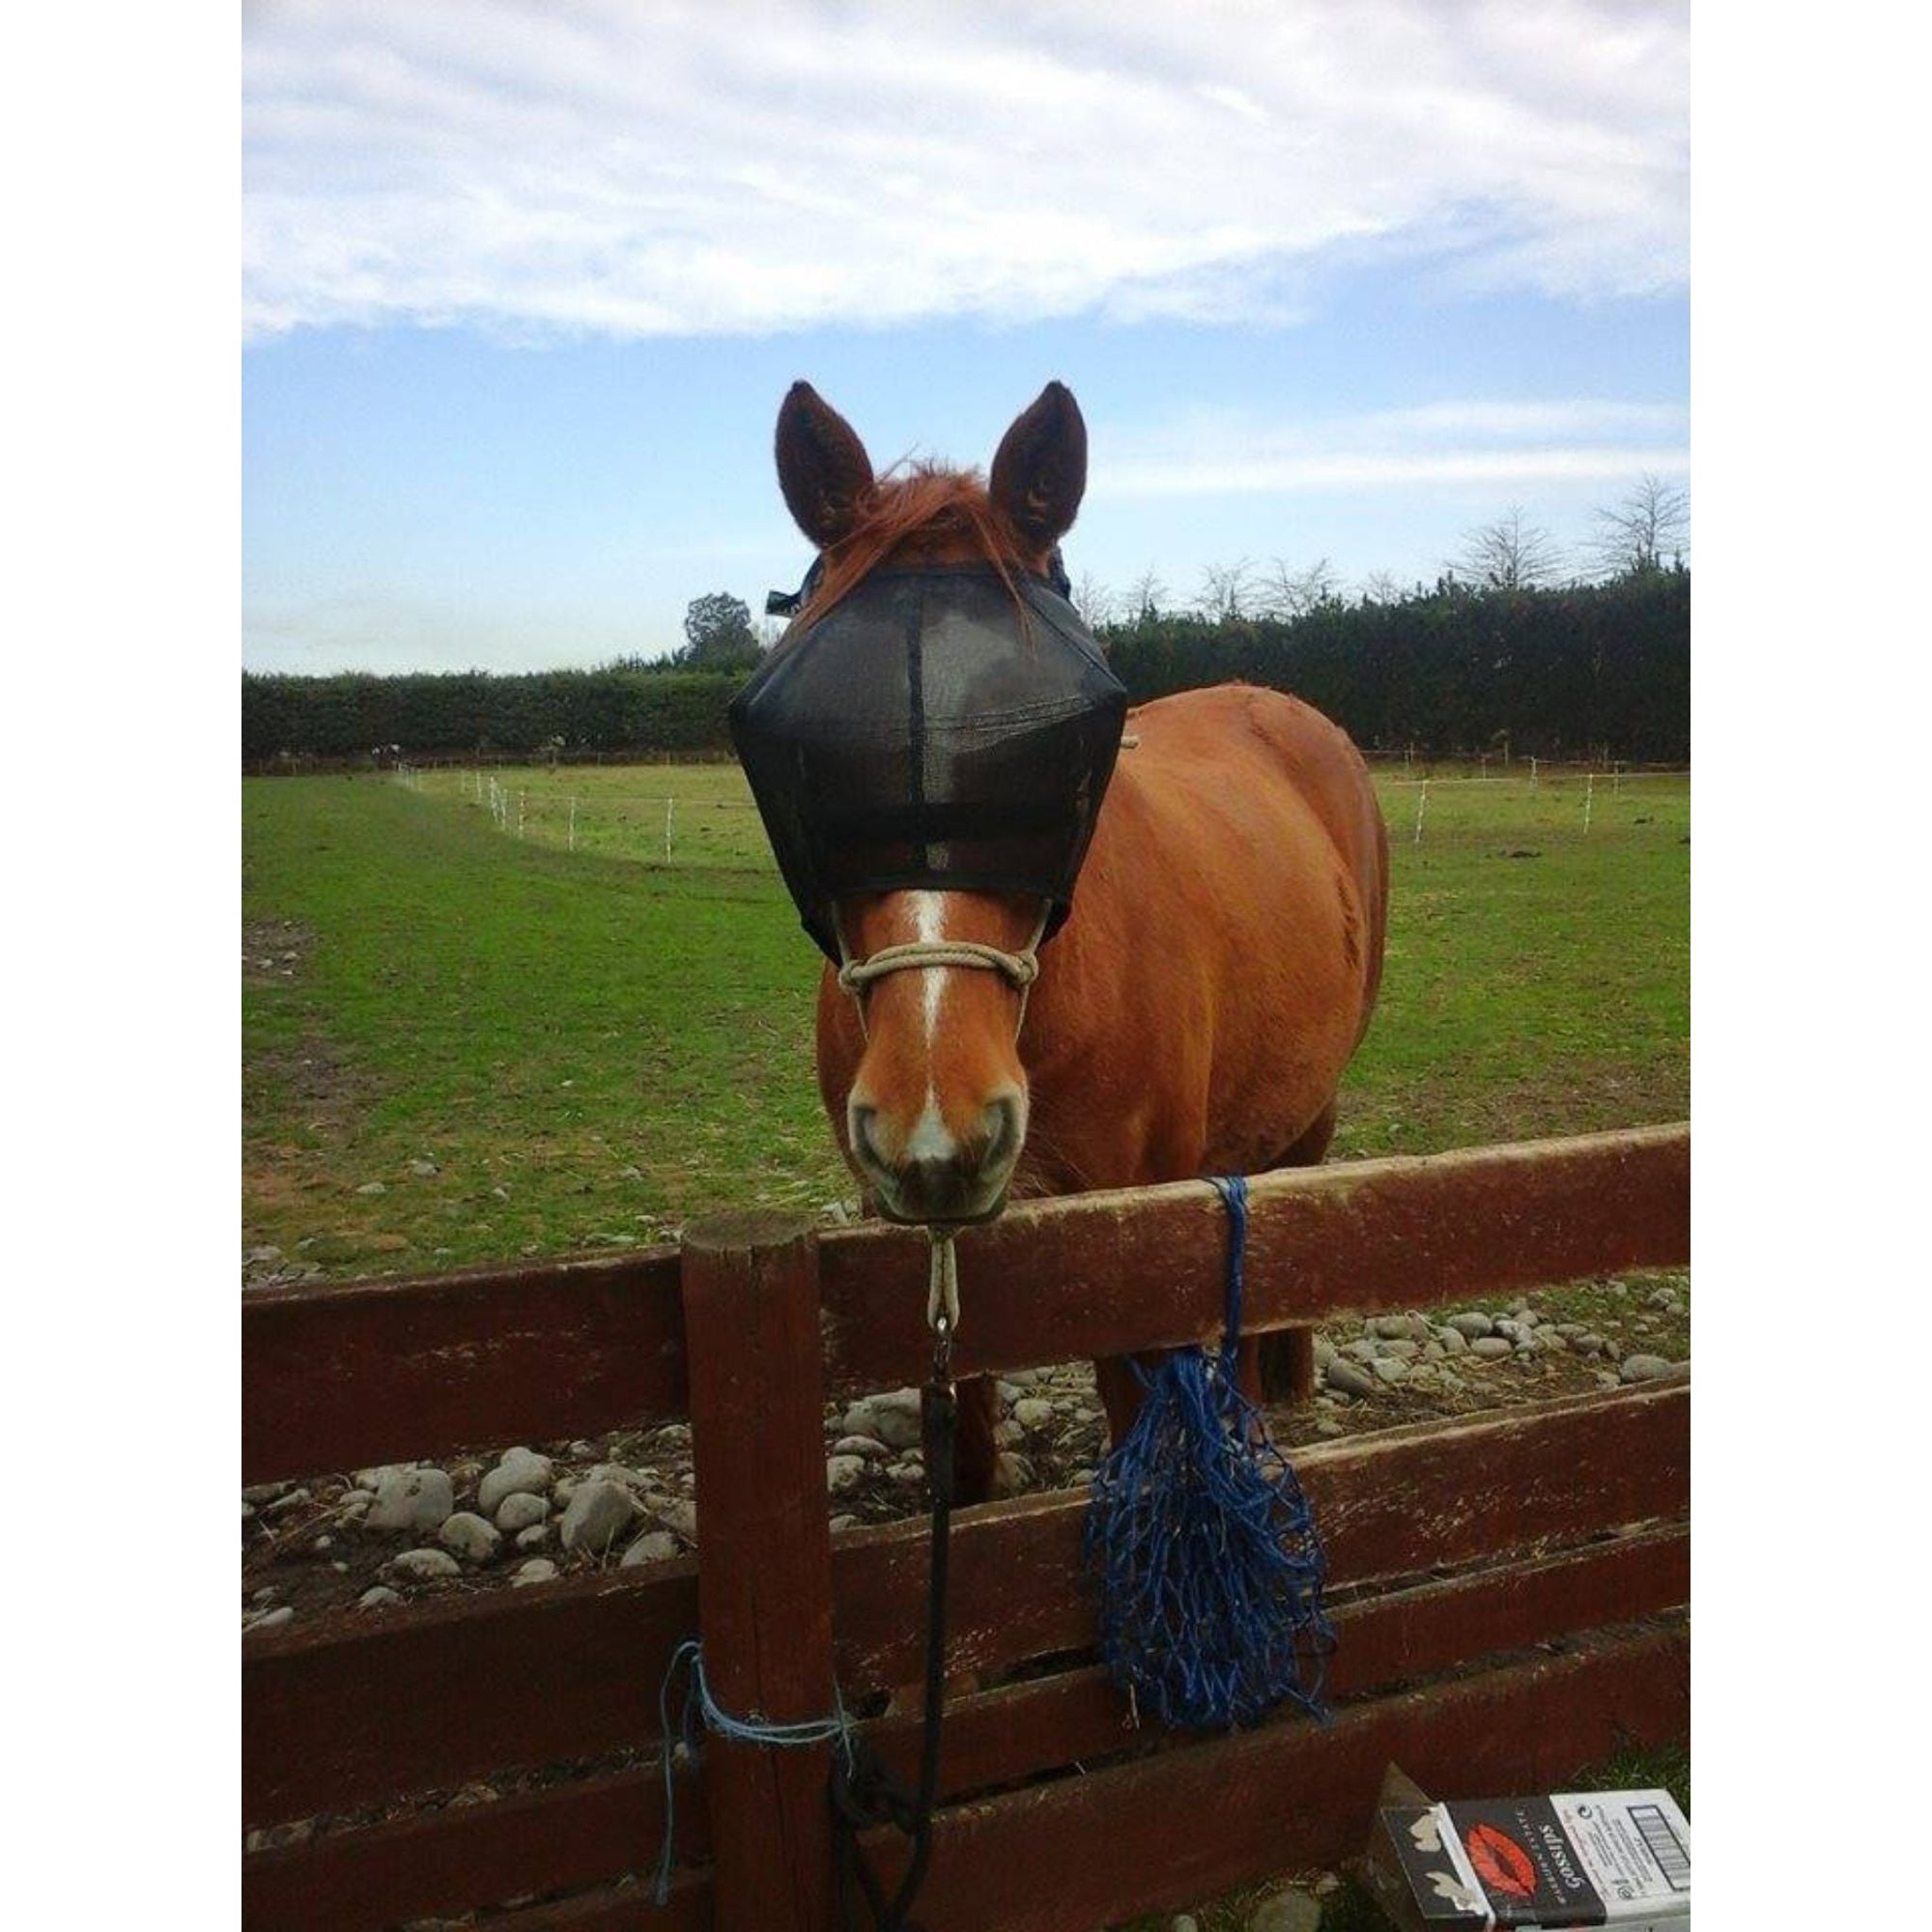 Horse wearing recovery visor with fly mask jacket on top.